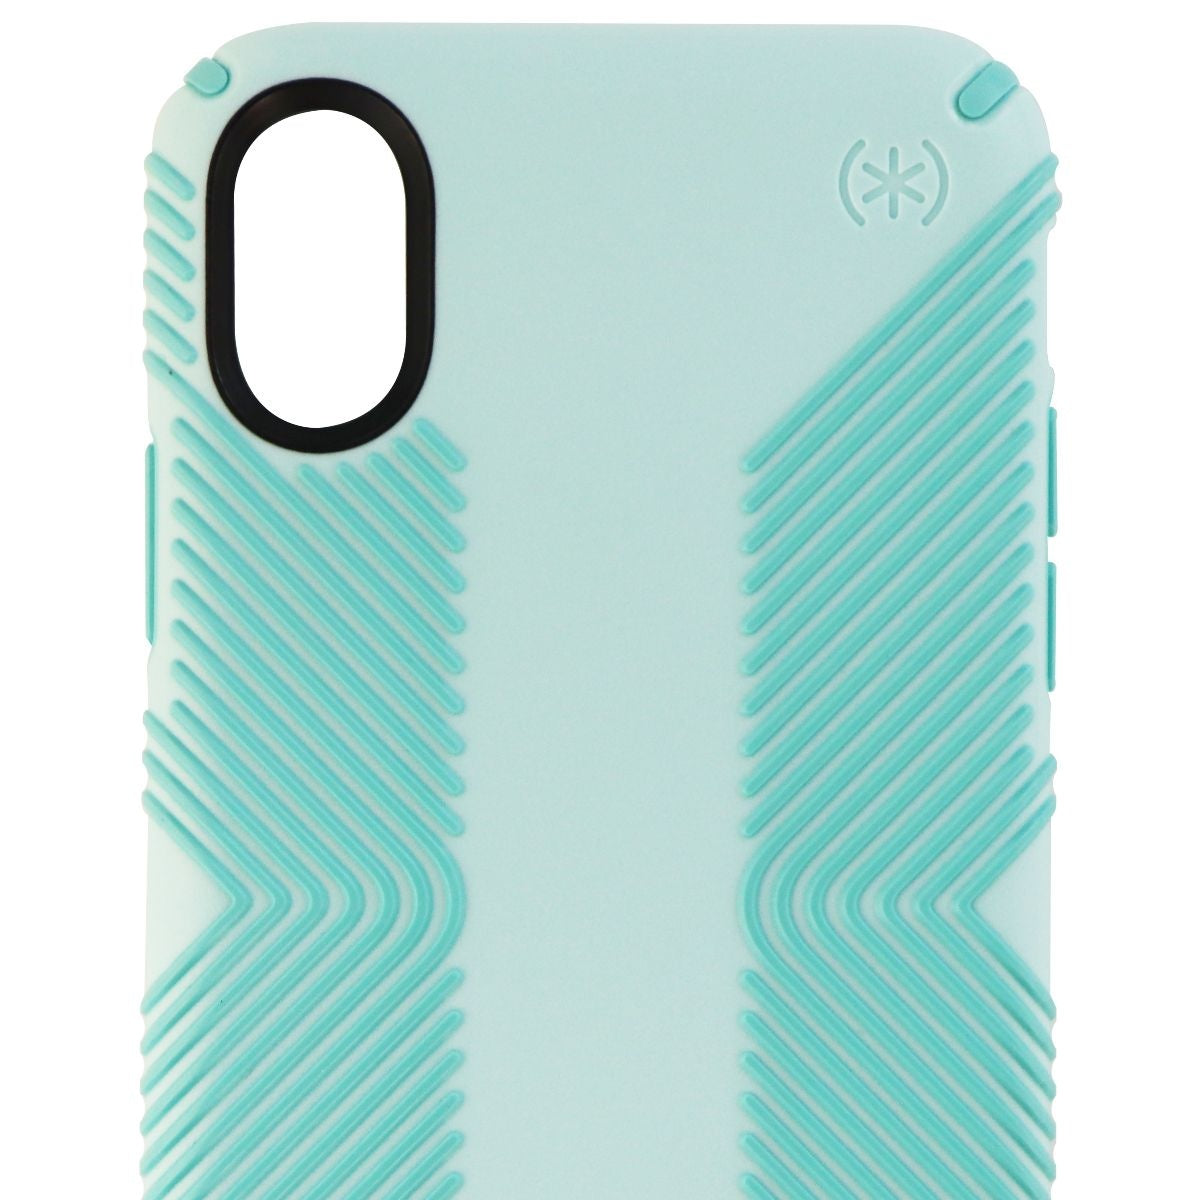 Speck Presidio Grip Hybrid Hard Case for Apple iPhone X - Surf Teal/Mykonos Blue Cell Phone - Cases, Covers & Skins Speck    - Simple Cell Bulk Wholesale Pricing - USA Seller